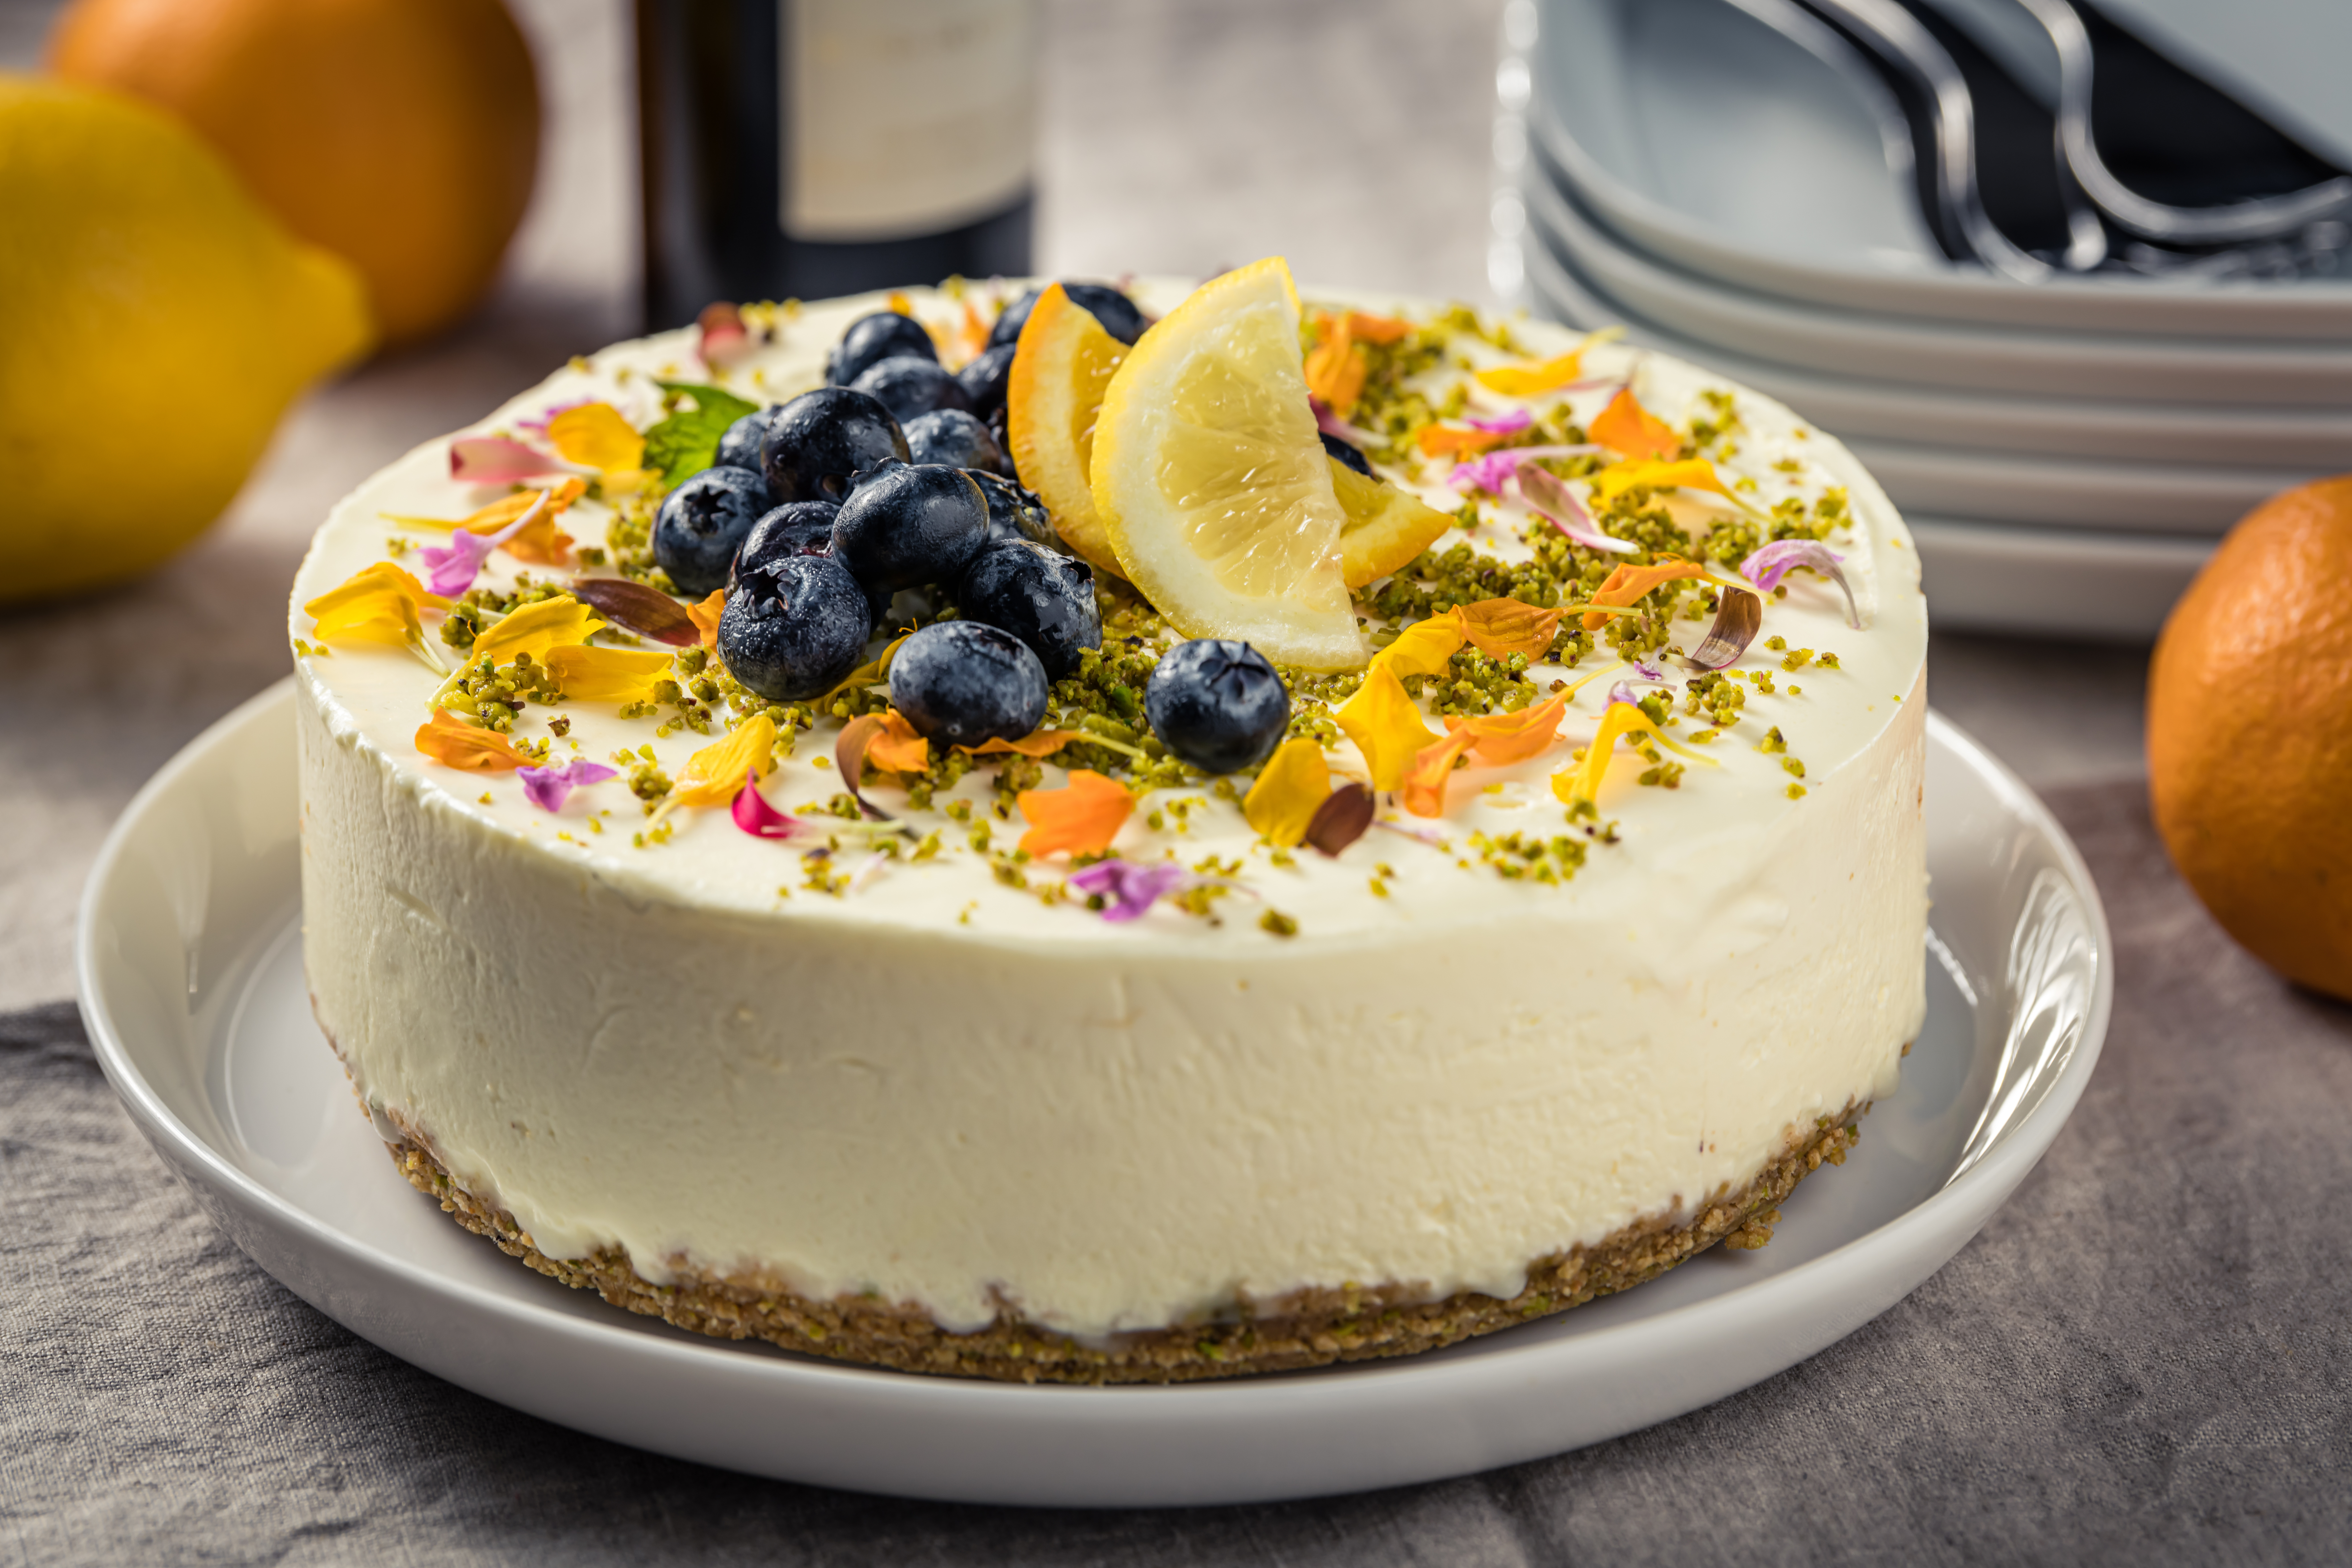 Cheesecake dessert | Source: Getty Images